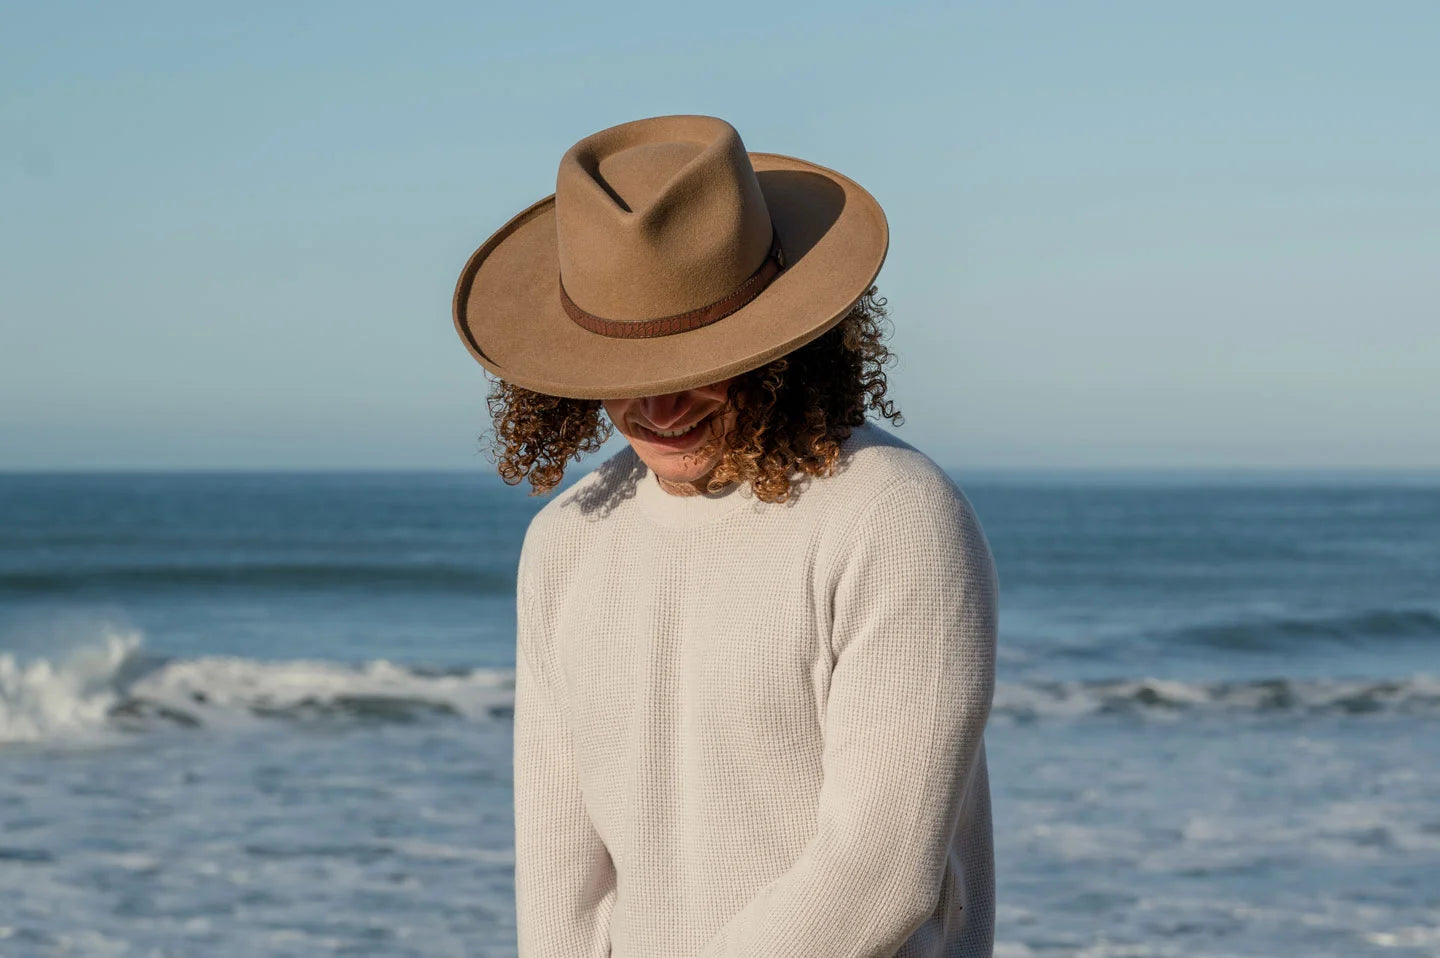 Man standing at beach wearing the Hudson mens wide brim hat by American Hat Makers